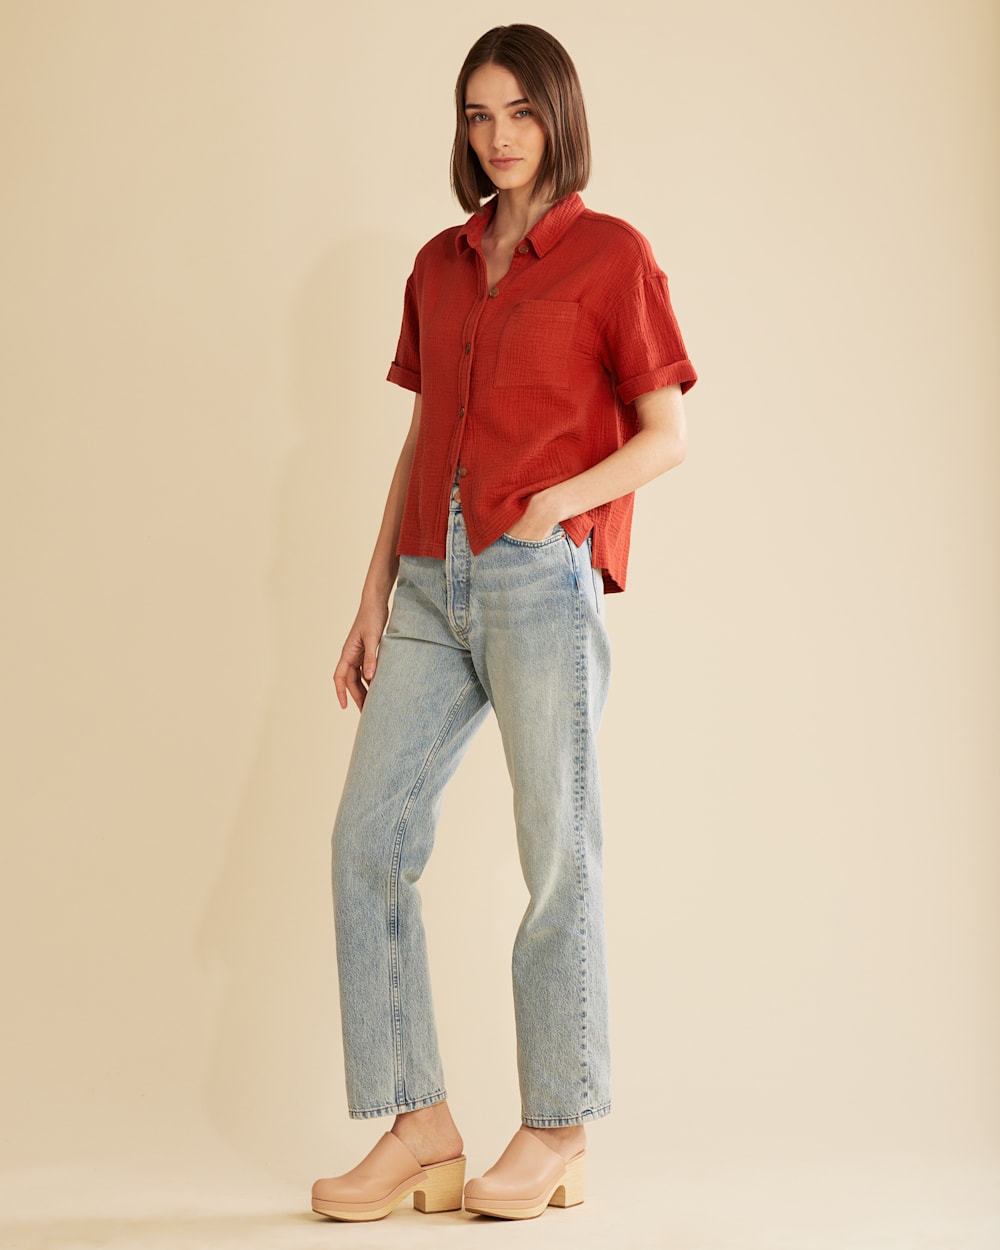 ALTERNATE VIEW OF WOMEN'S BUTTON-UP COTTON GAUZE SHIRT IN RED OCHRE image number 4